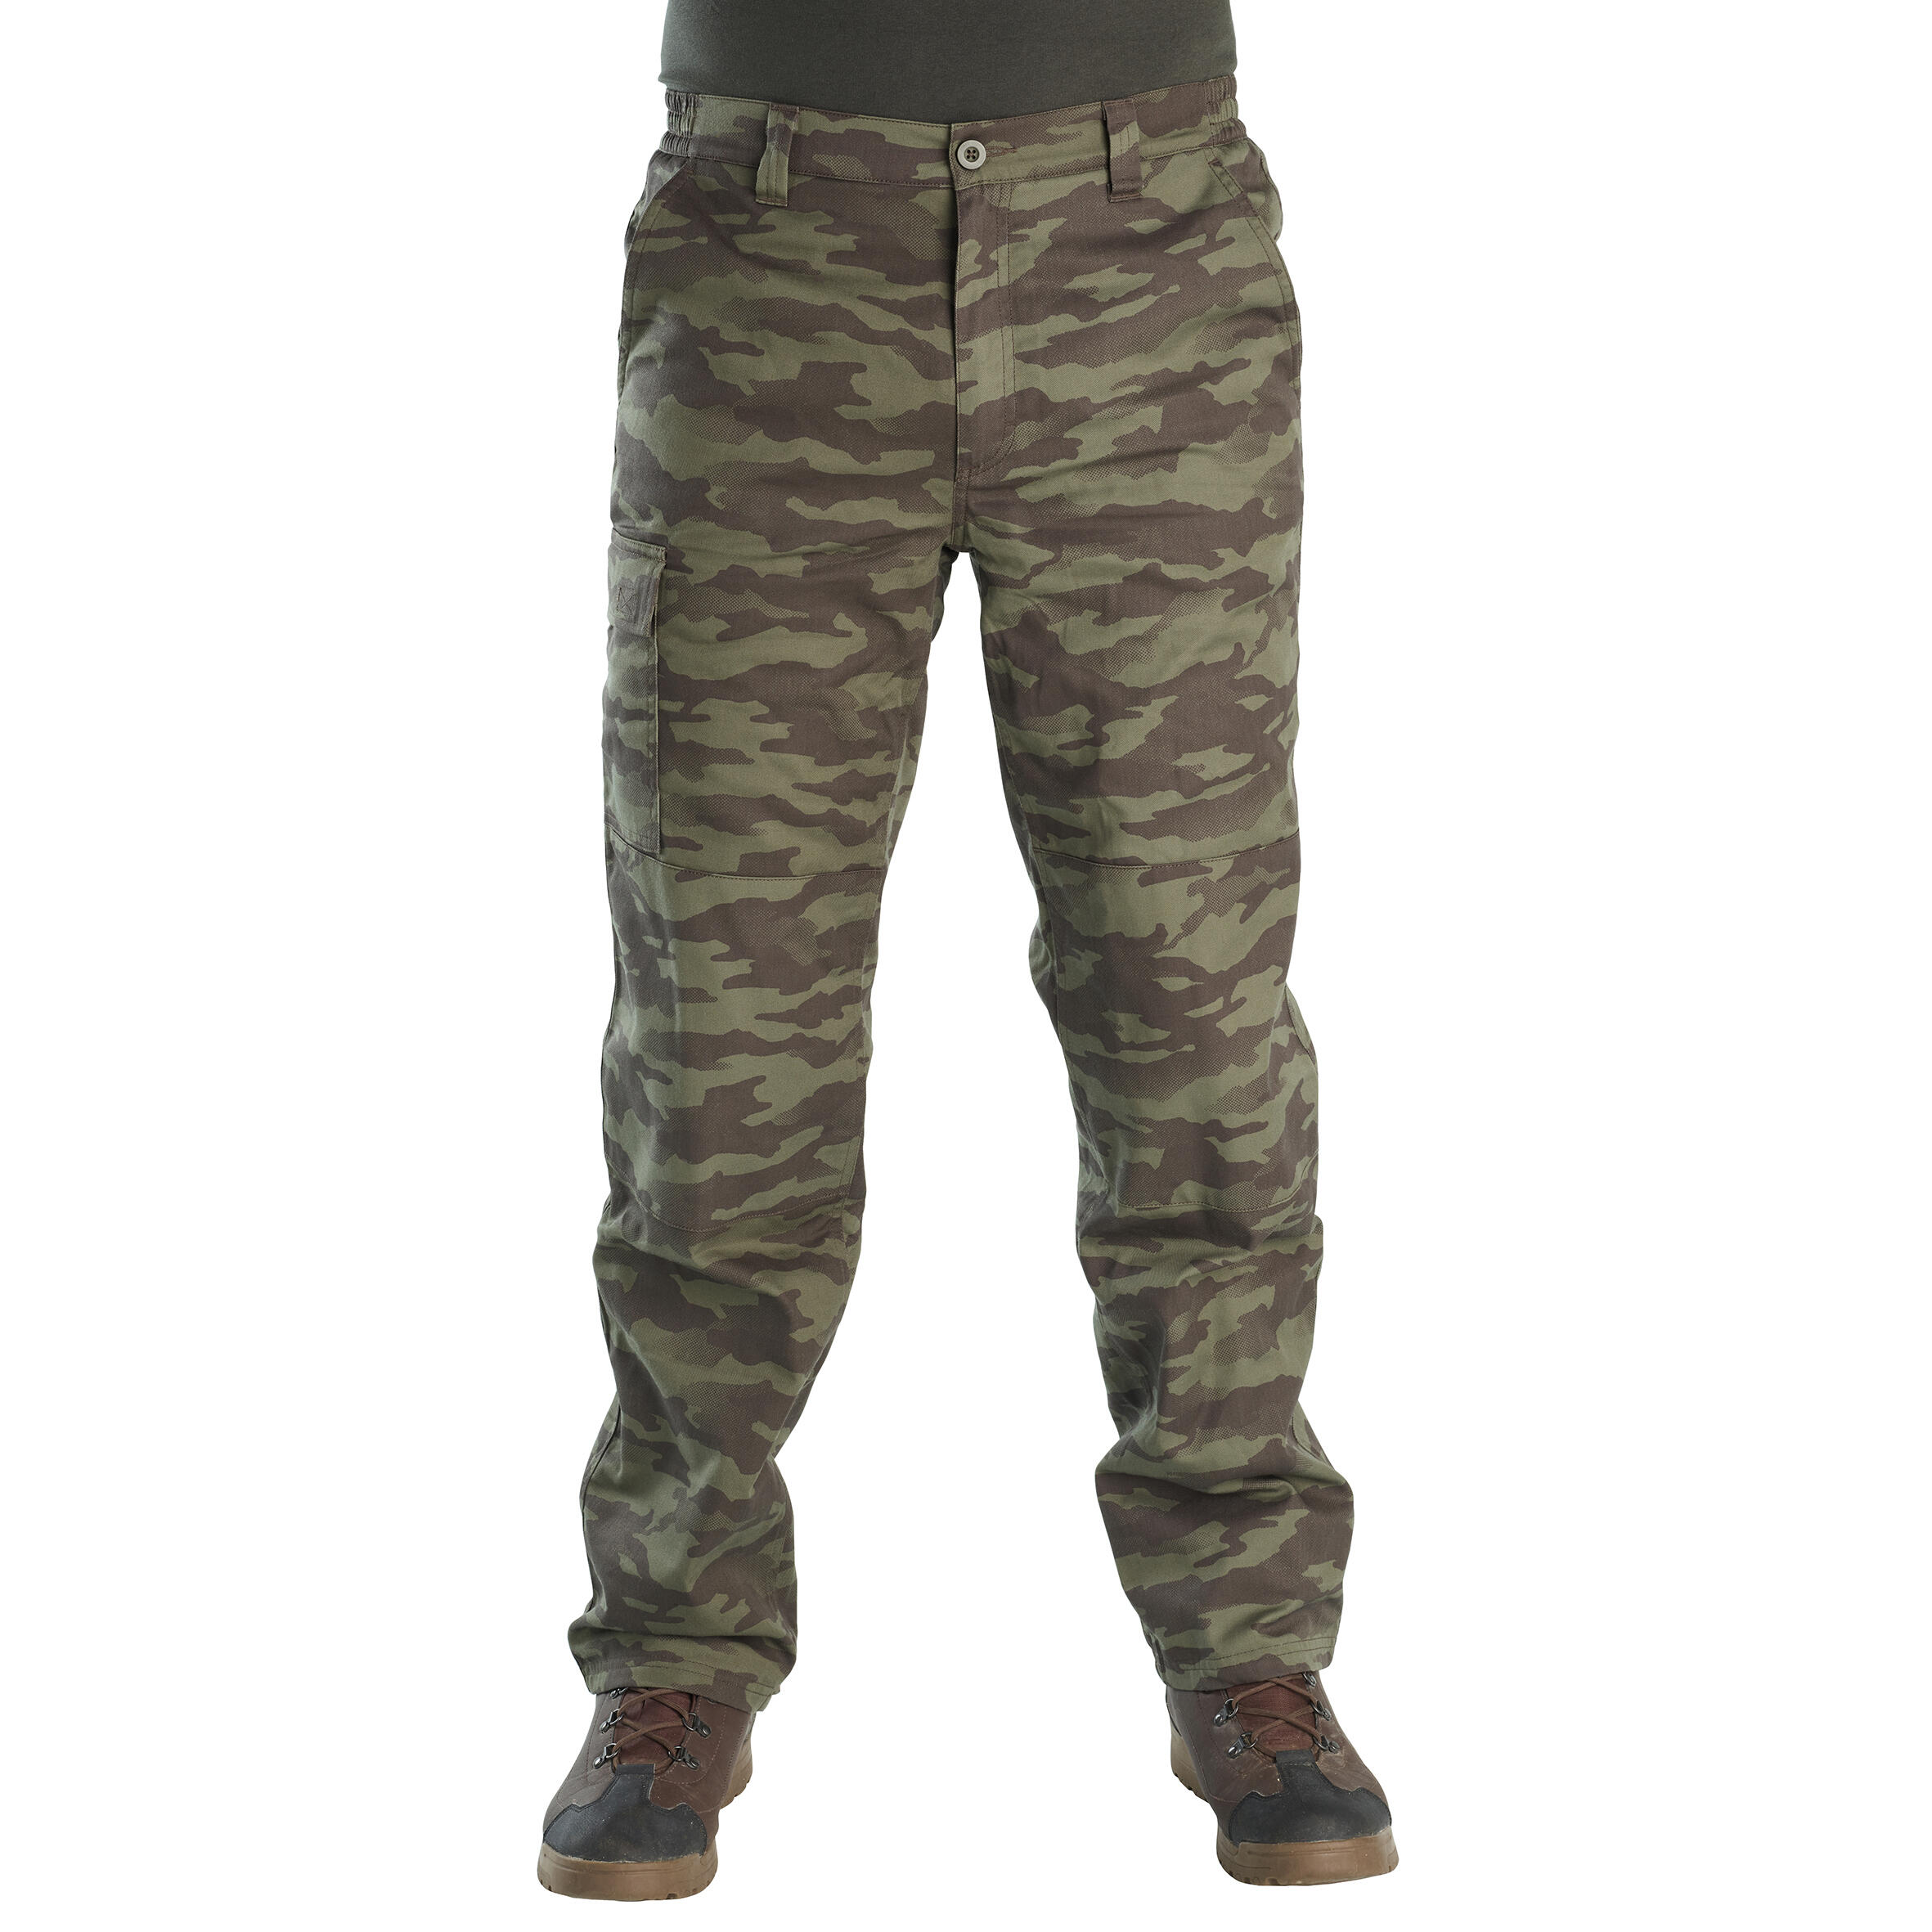 VI - THINK Stylish Army Jungle Print Cargo Pant For Boys and New Army  Design Pant For